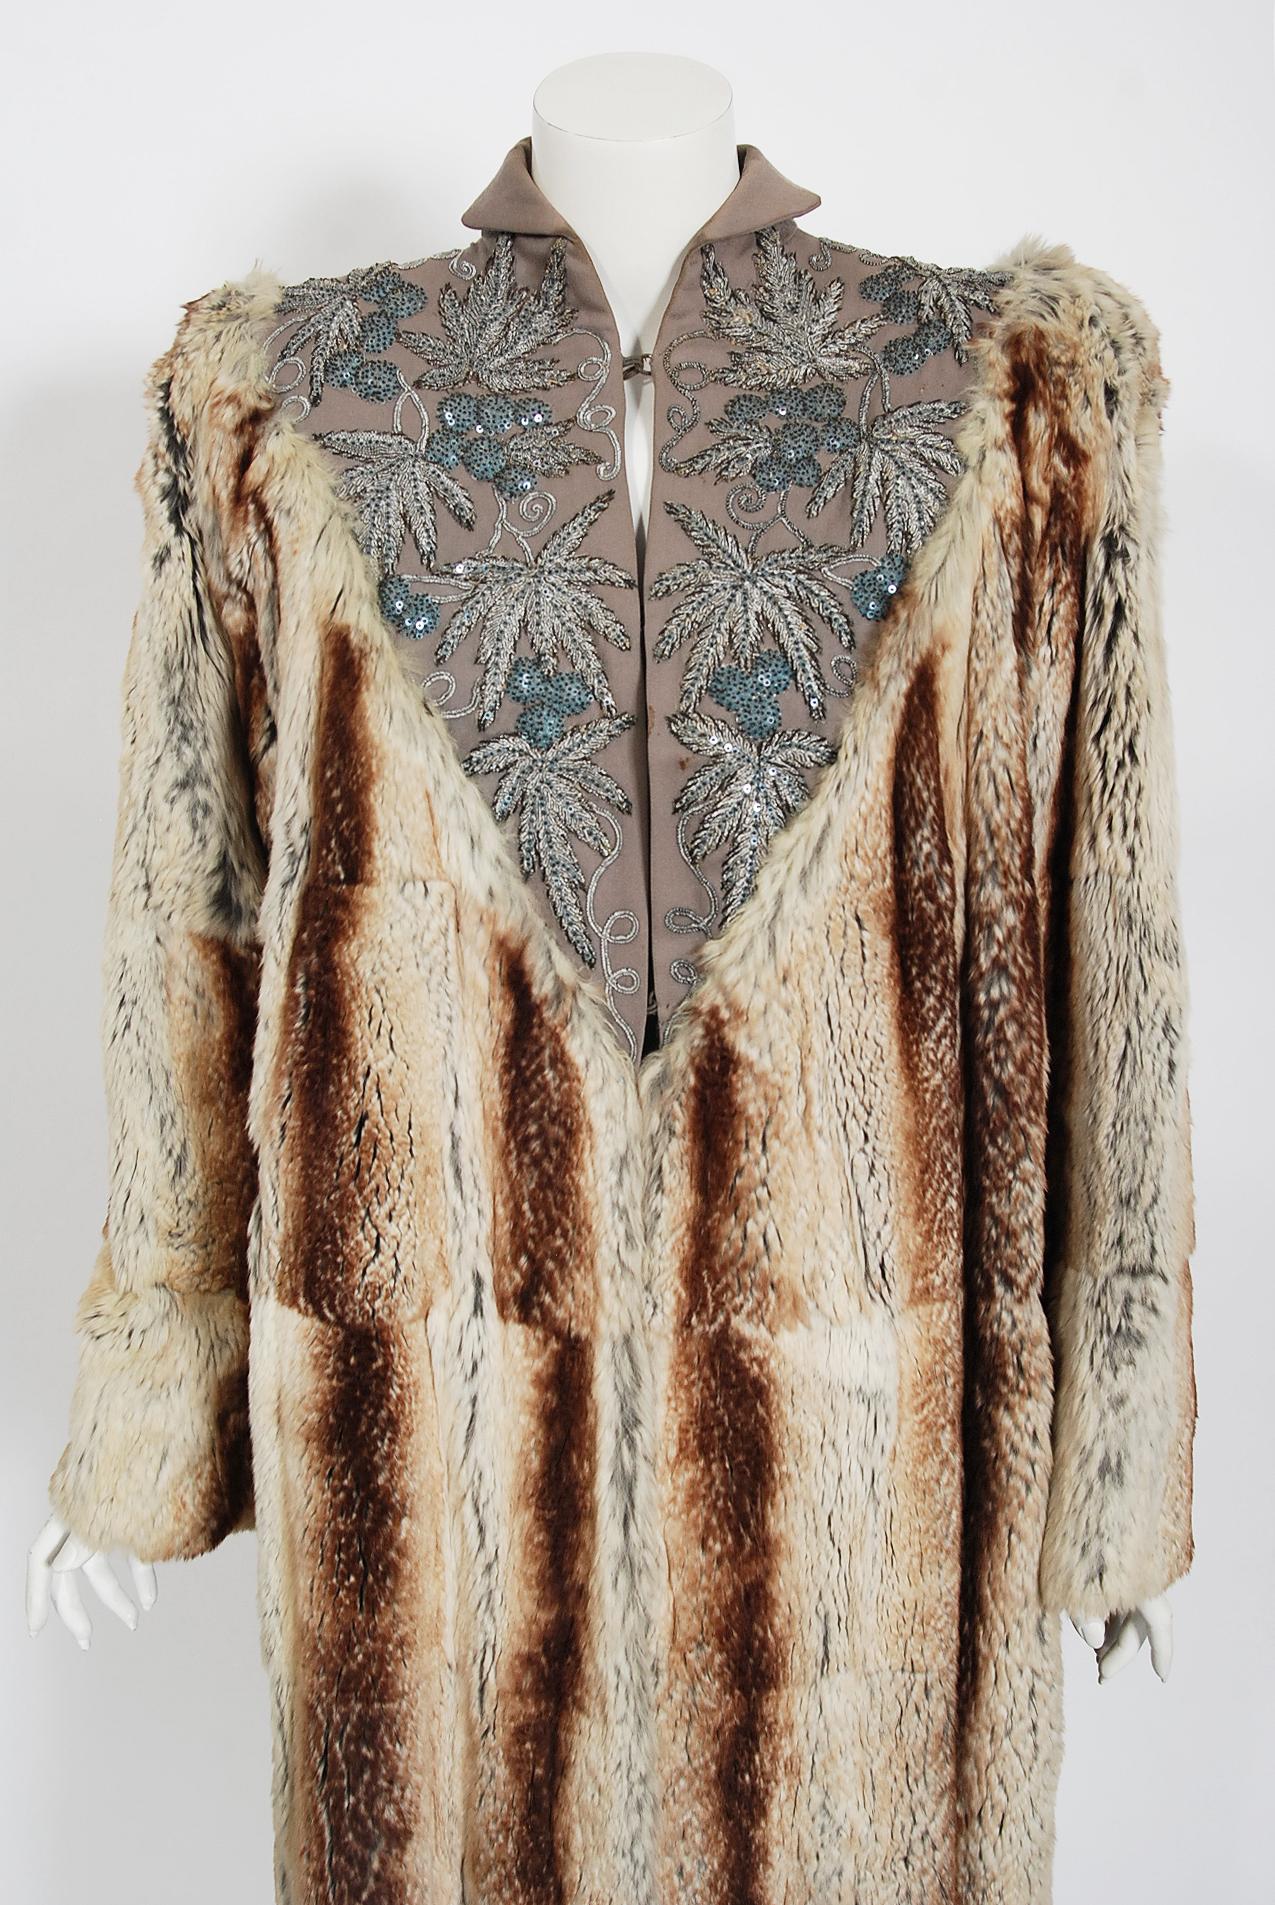 This unbelievable, museum-quality early 1940's European embroidered gabardine & genuine chinchilla fur coat is a breathtaking piece of fashion history. The care to piece a full-length chinchilla coat together after carefully selecting matching hues